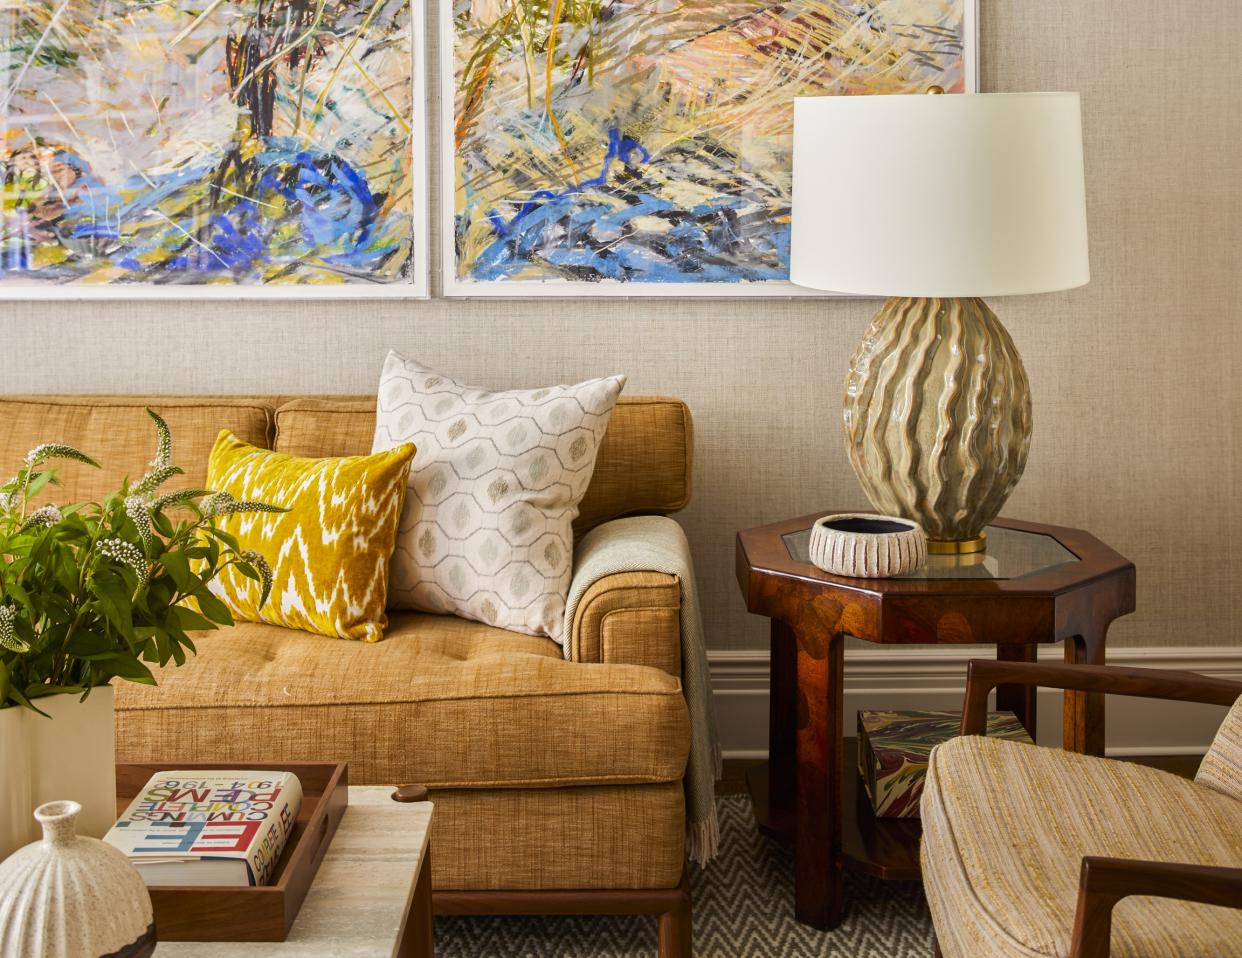  A living room with art on the walls and colorful decor. 